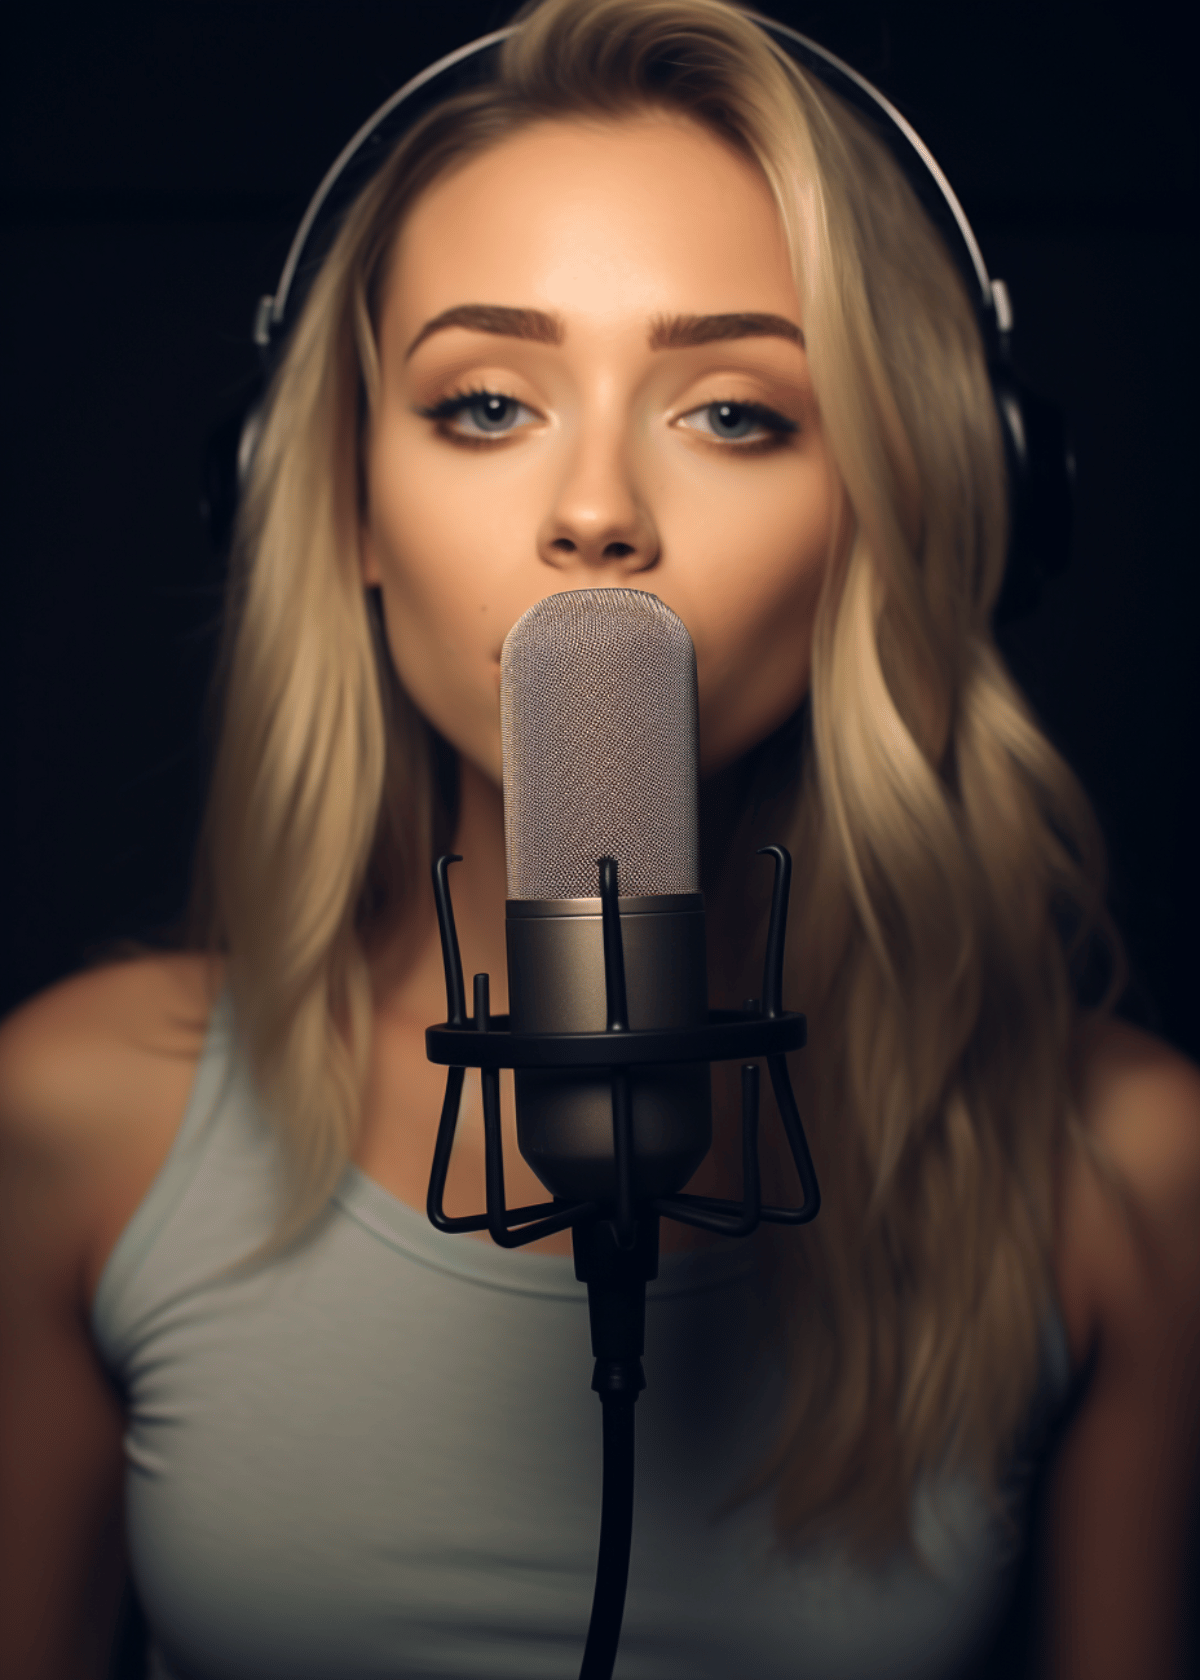 The Best ASMR Microphones That Bless Your Voice & Bring Heaven To Those That Listen! 🎙